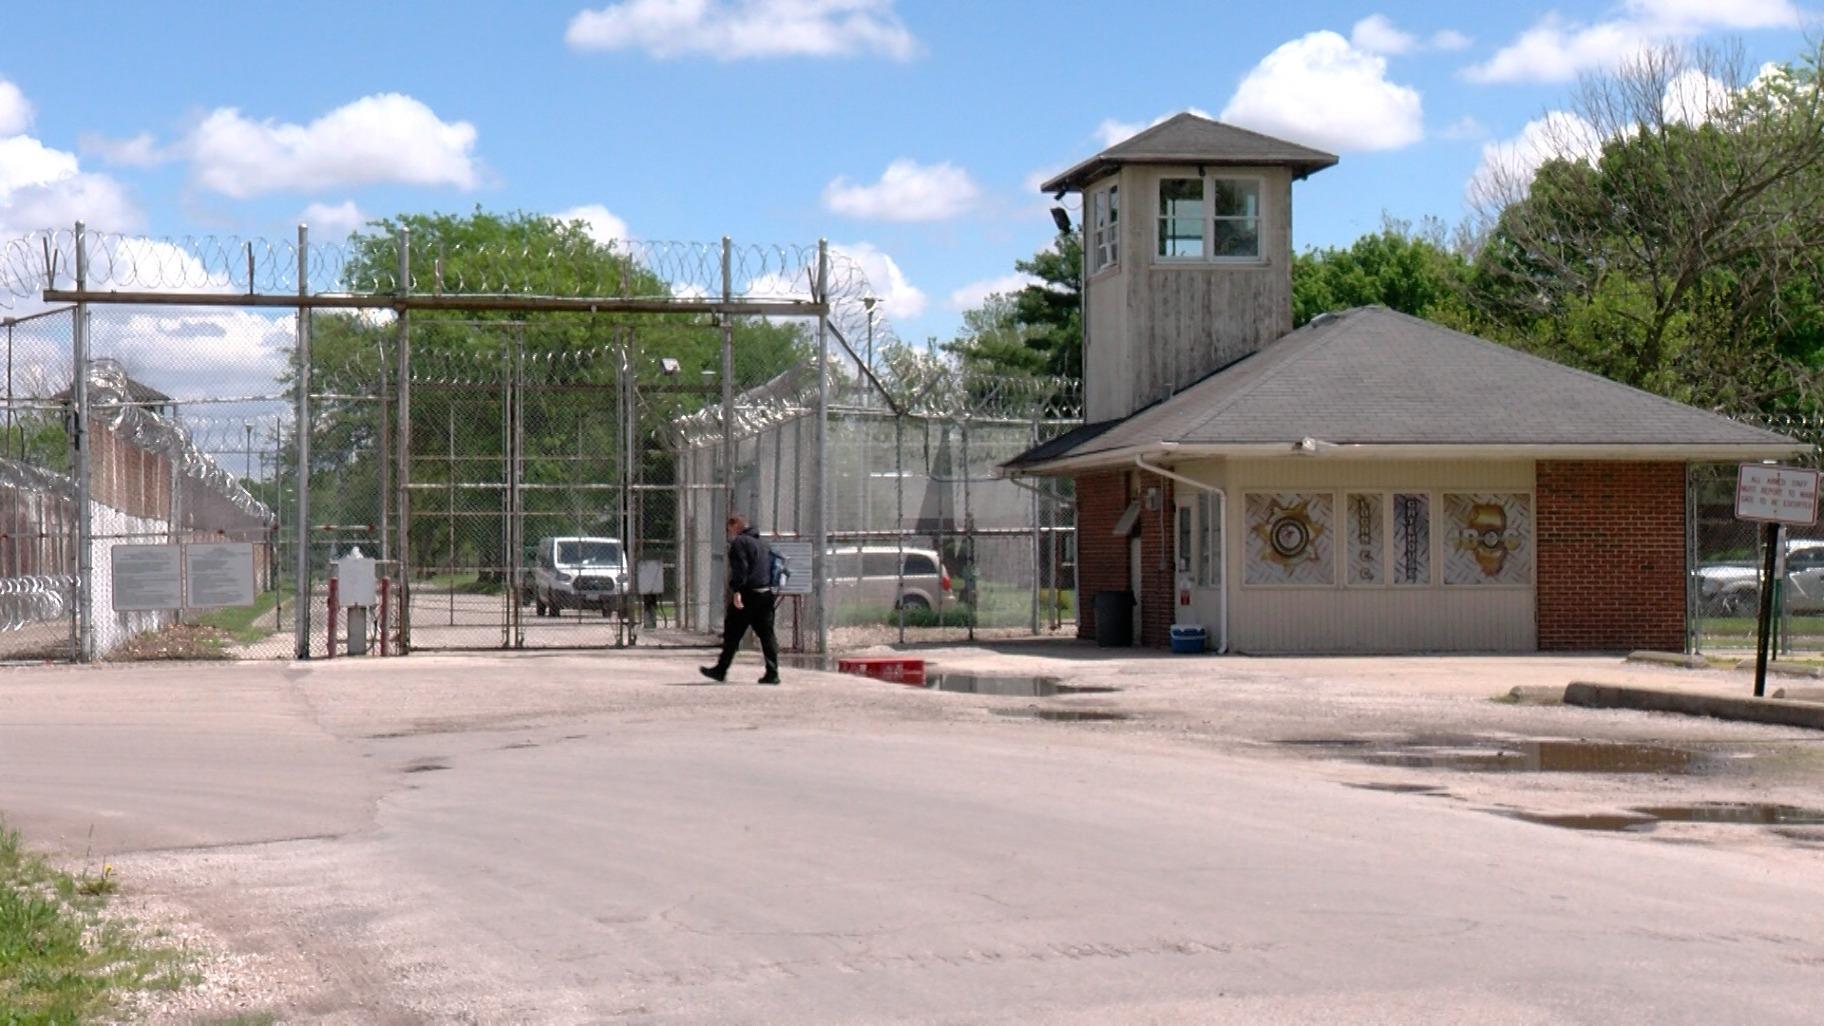 Logan Correctional Center is pictured in Lincoln. (Andrew Campbell / Capitol News Illinois)